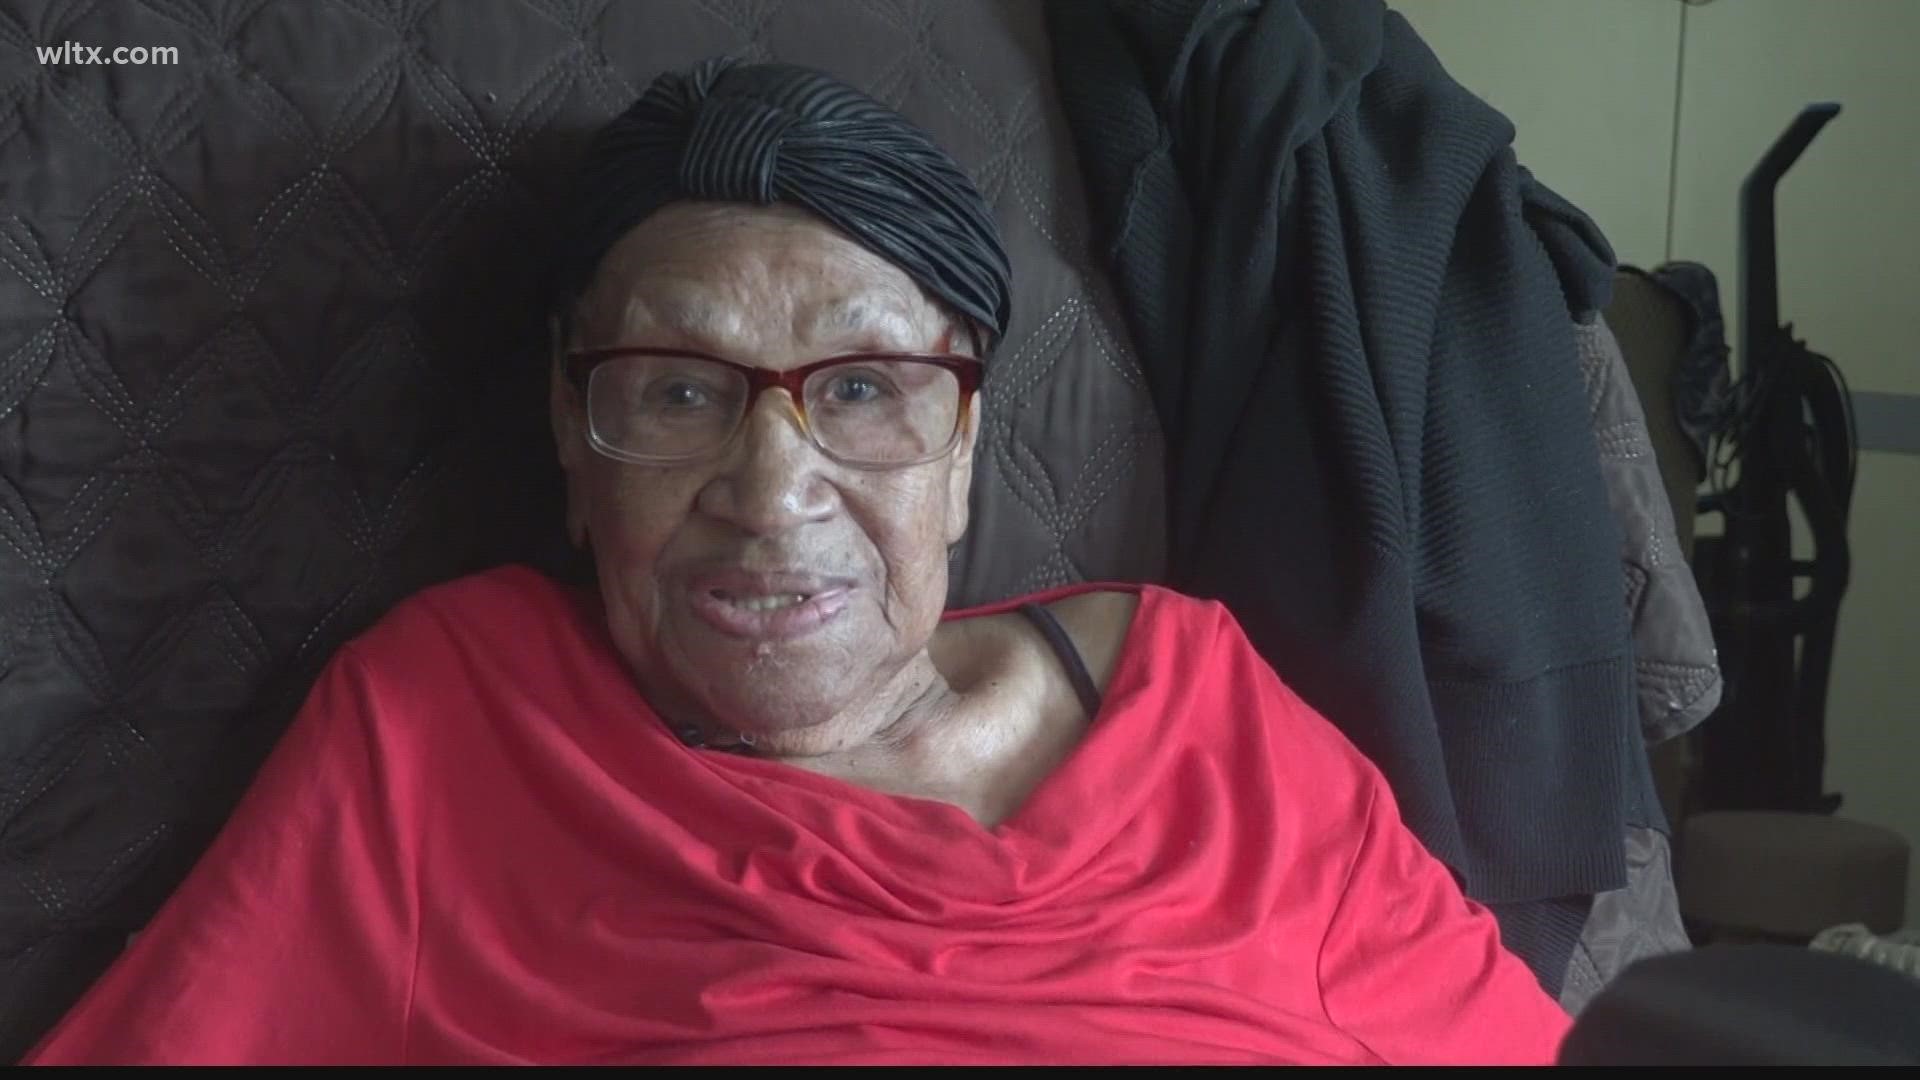 Santee woman Adell Julie Thompson celebrated her 107th birthday on October 10th, and reflects on her journey leading up to this moment.